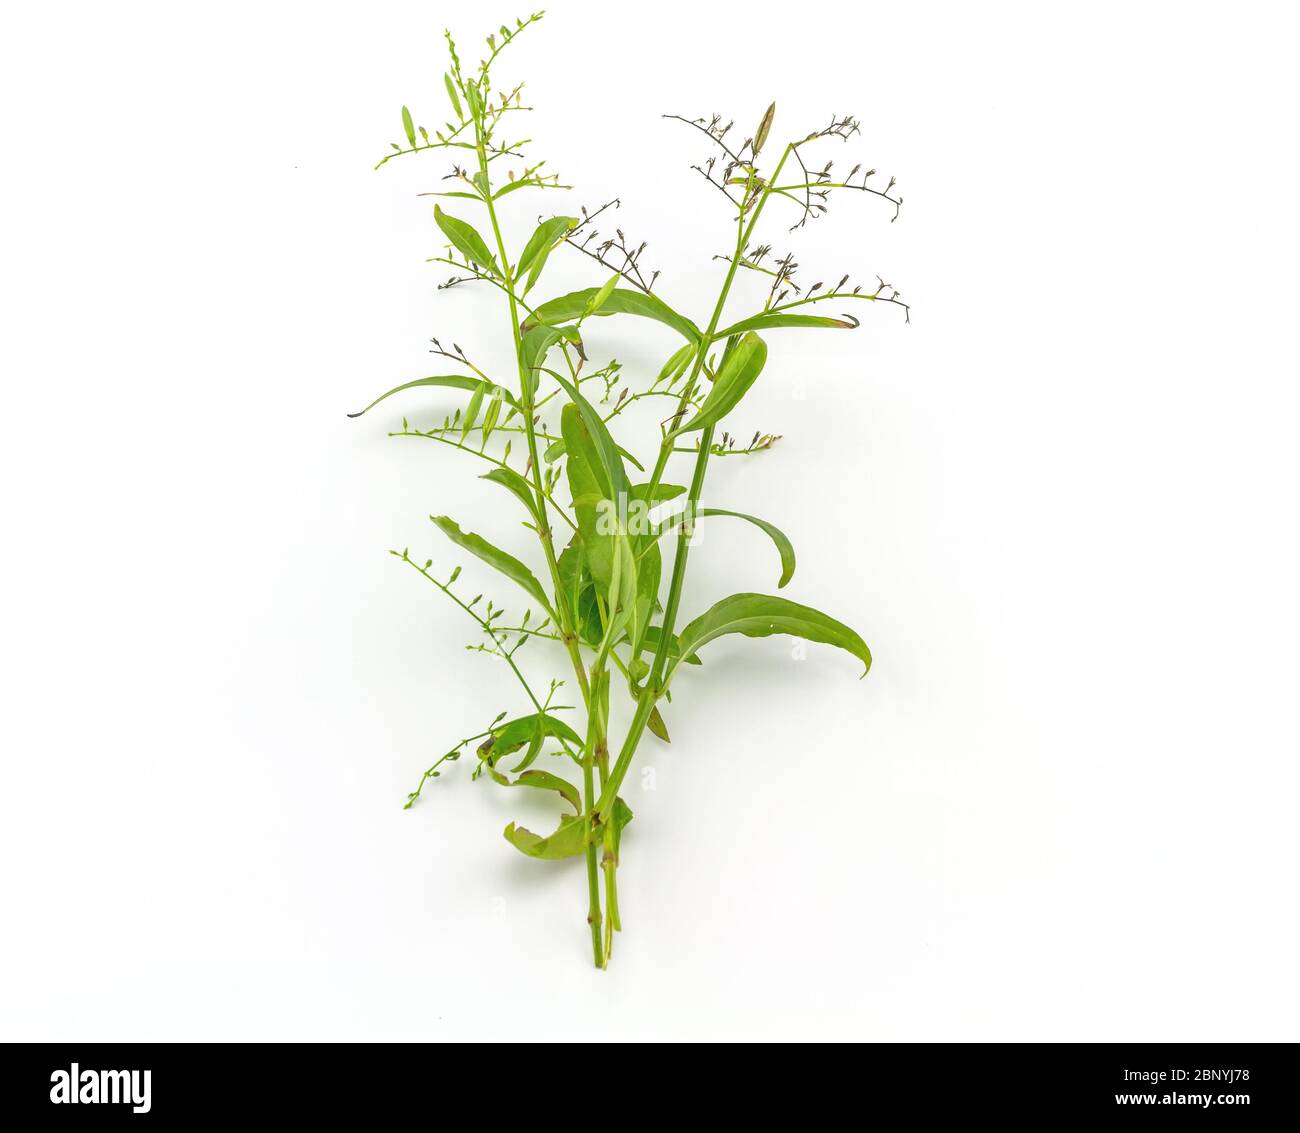 Fresh of Andrographis paniculata plant on white background use for herbal product Stock Photo